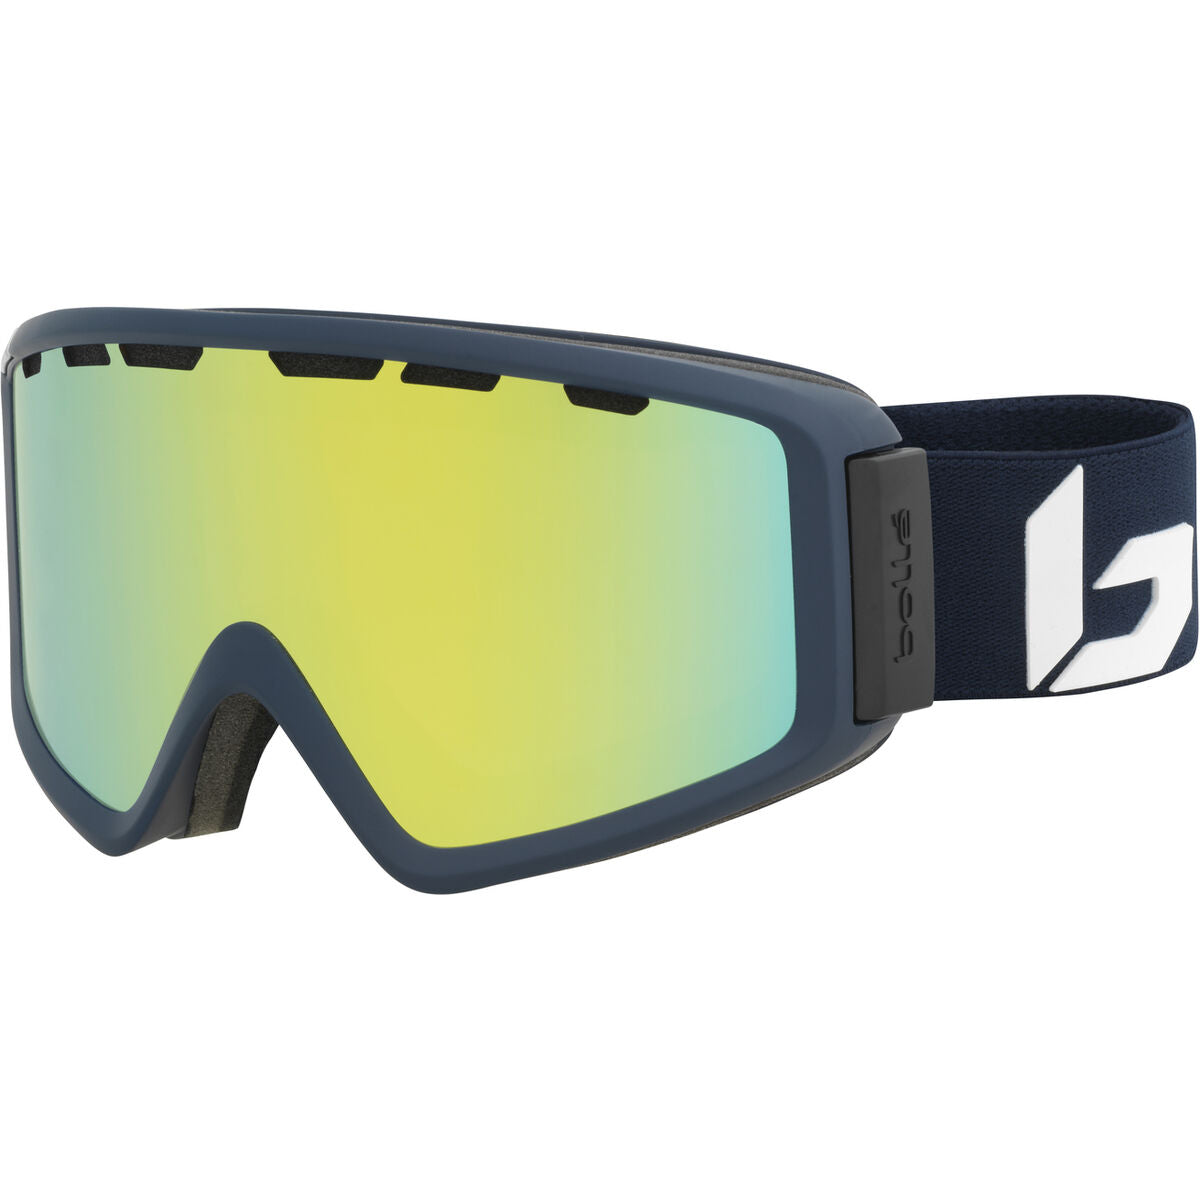 Bolle Z5 Otg Goggles  Matte Blue Corp One Size